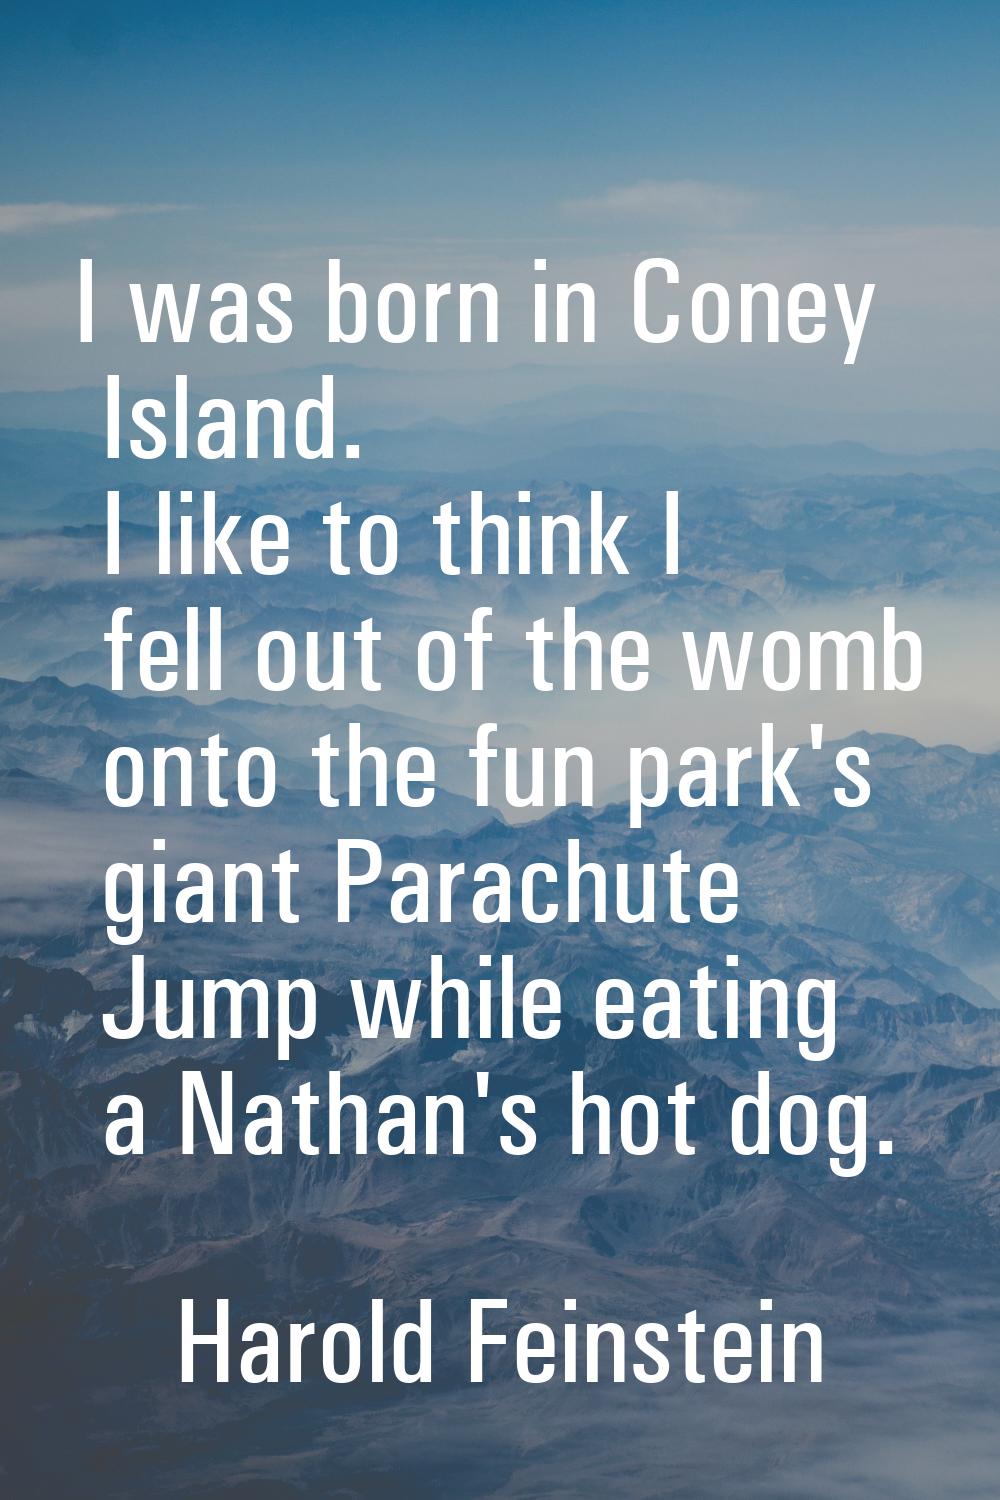 I was born in Coney Island. I like to think I fell out of the womb onto the fun park's giant Parach